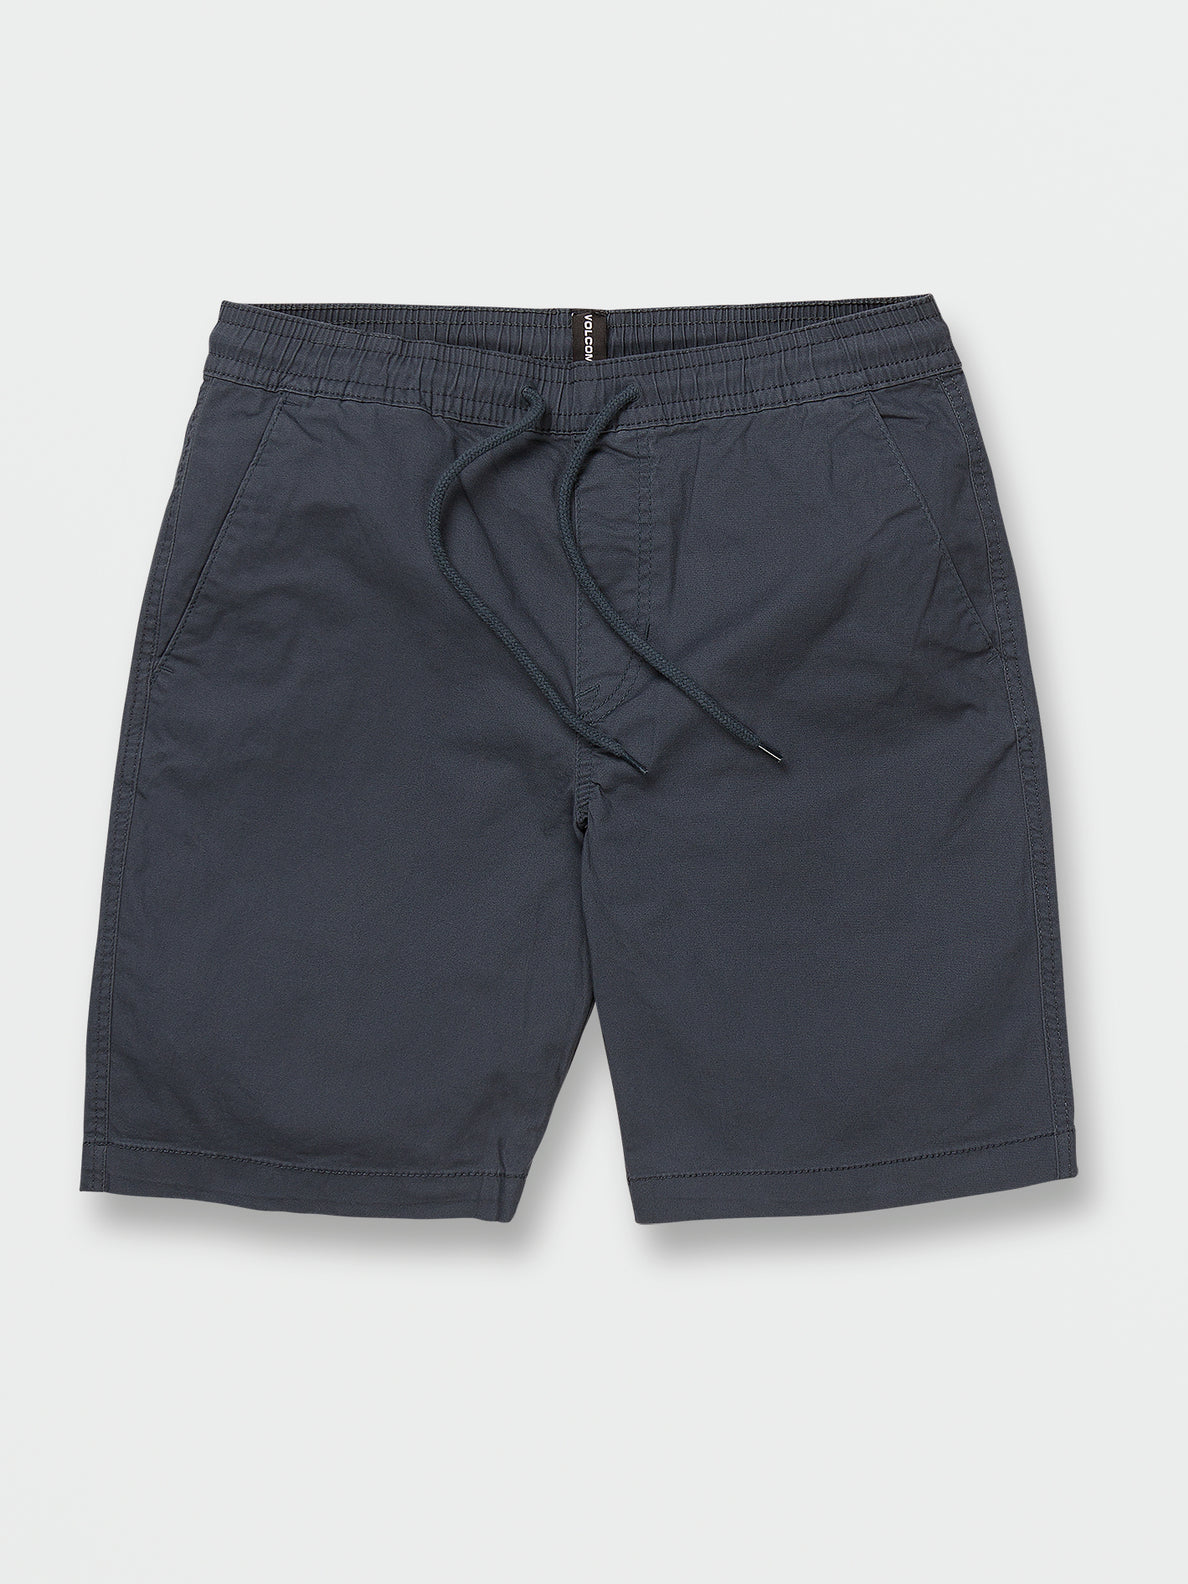 Cleaver Elastic Waist Stretch Shorts - Faded Navy